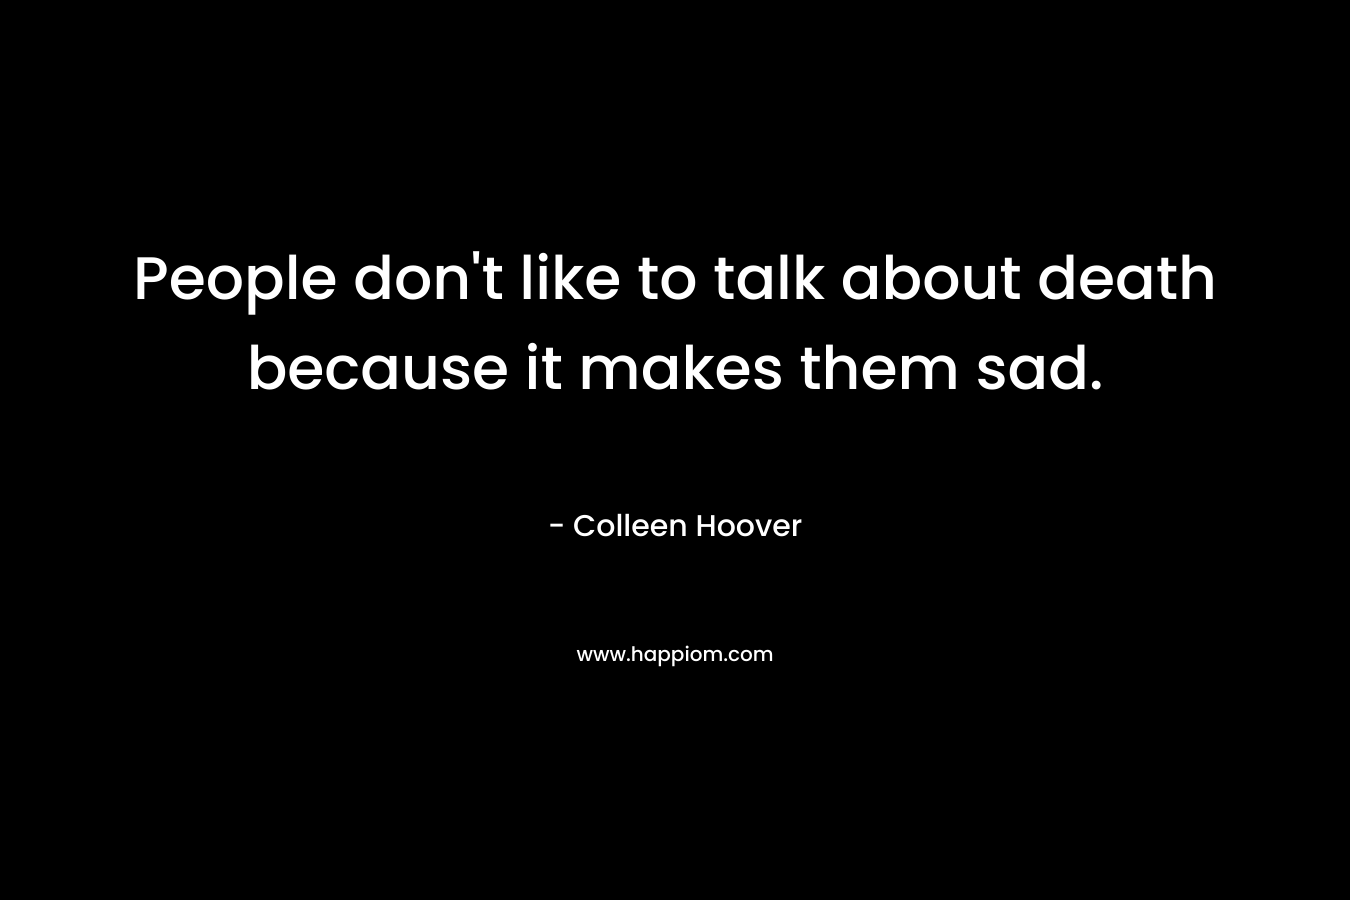 People don't like to talk about death because it makes them sad.